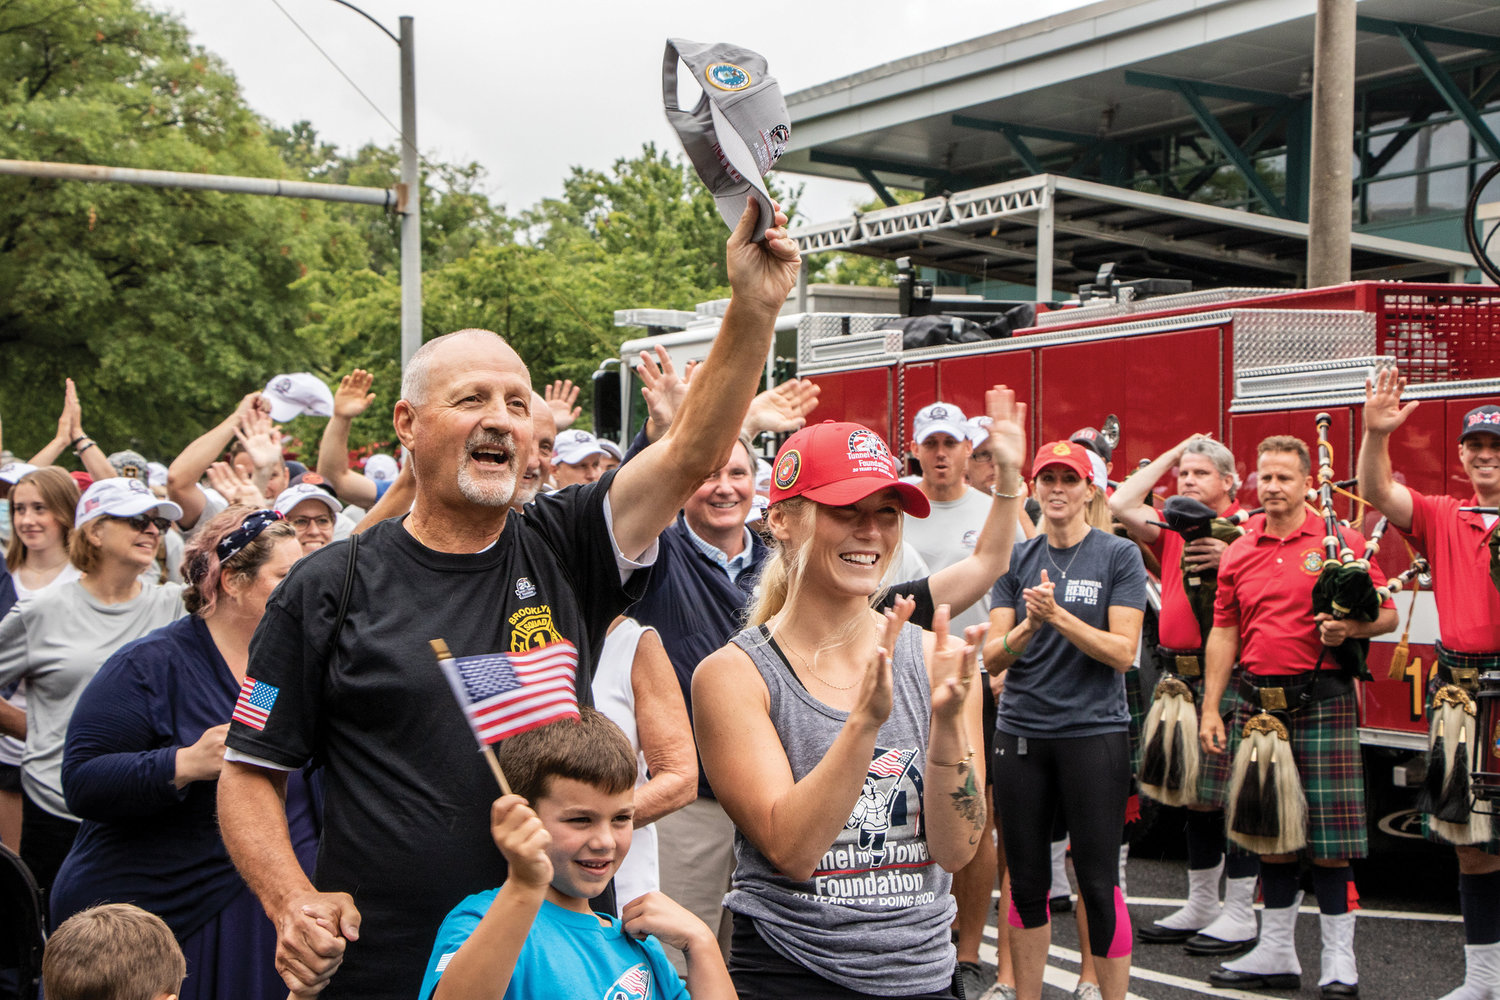 Frank Siller, chairman and CEO of the Tunnel to Towers Foundation, waves his hat outside of a fire station in Arlington, Va., Aug. 1, as he and other participants begin the "Never Forget Walk" in memory of the nearly 3,000 lives lost during the 9/11 terrorist attacks. The 500-mile-plus walk began near the Pentagon, then headed to Shanksville, Pa., and was to end close to Sept. 11, the 20th anniversary of 9/11, at the site of the former World Trade Center’s Twin Towers in Lower Manhattan.